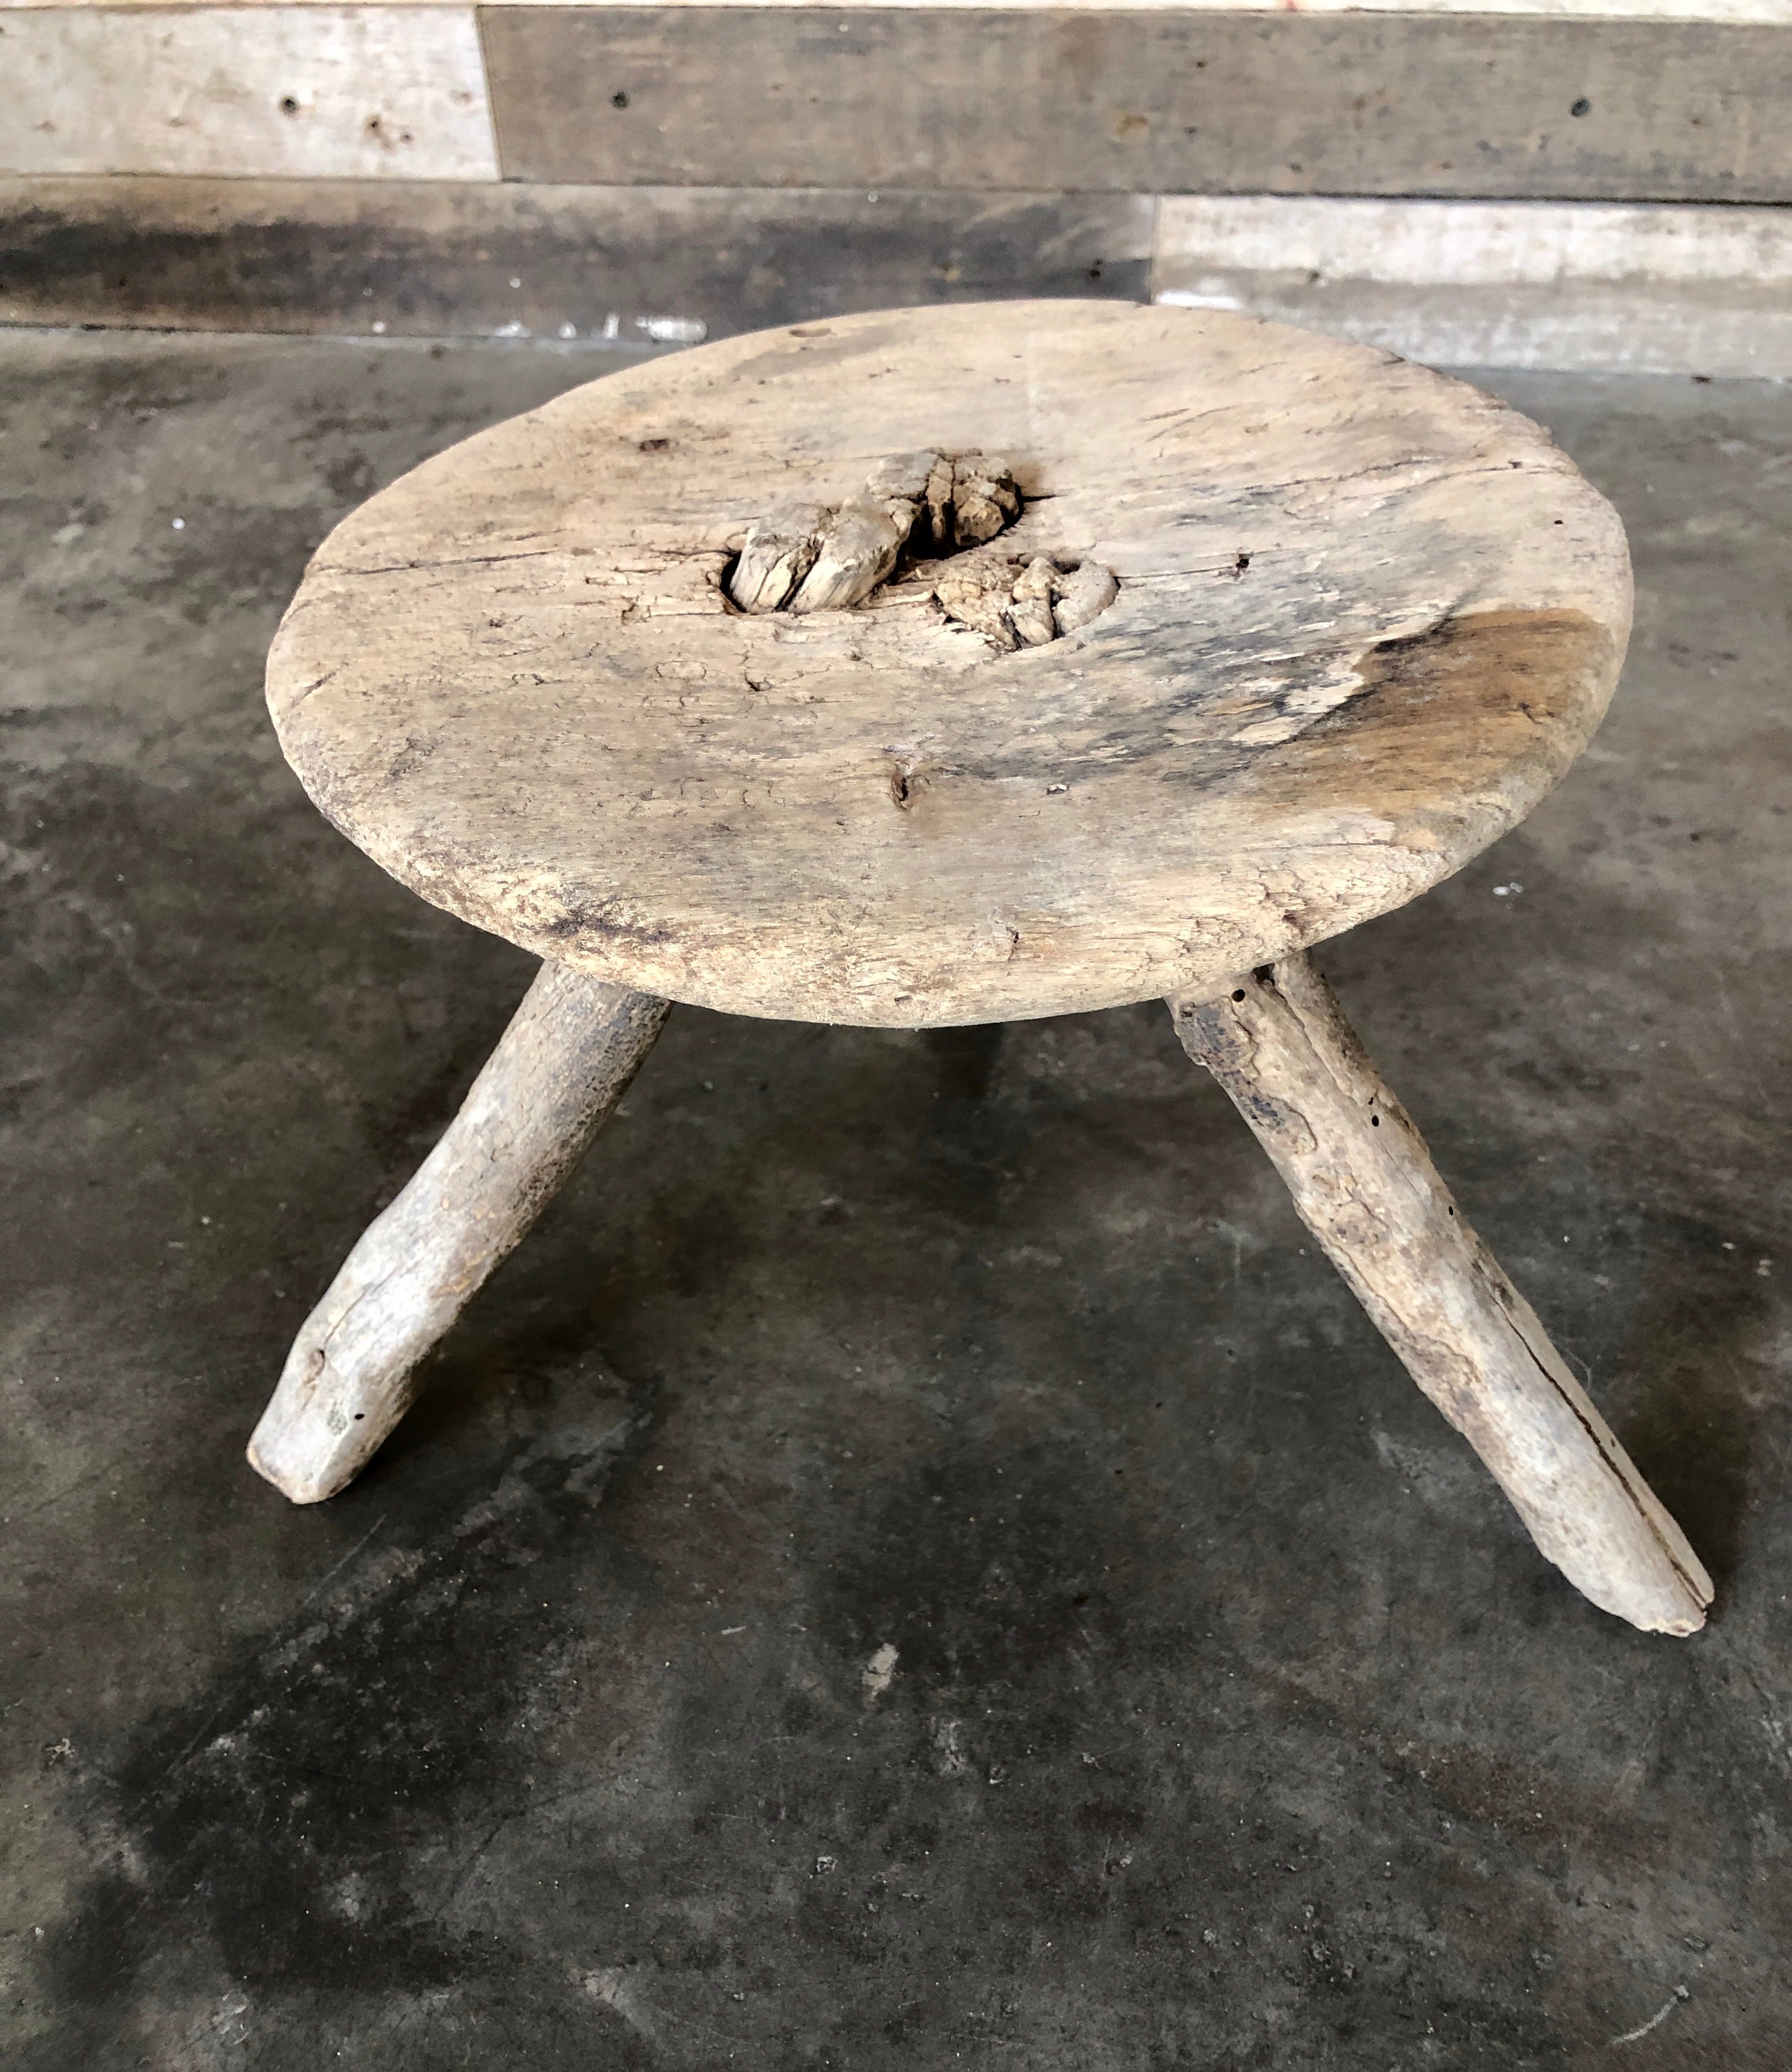 1970's primitive style stool - Made in Mexico